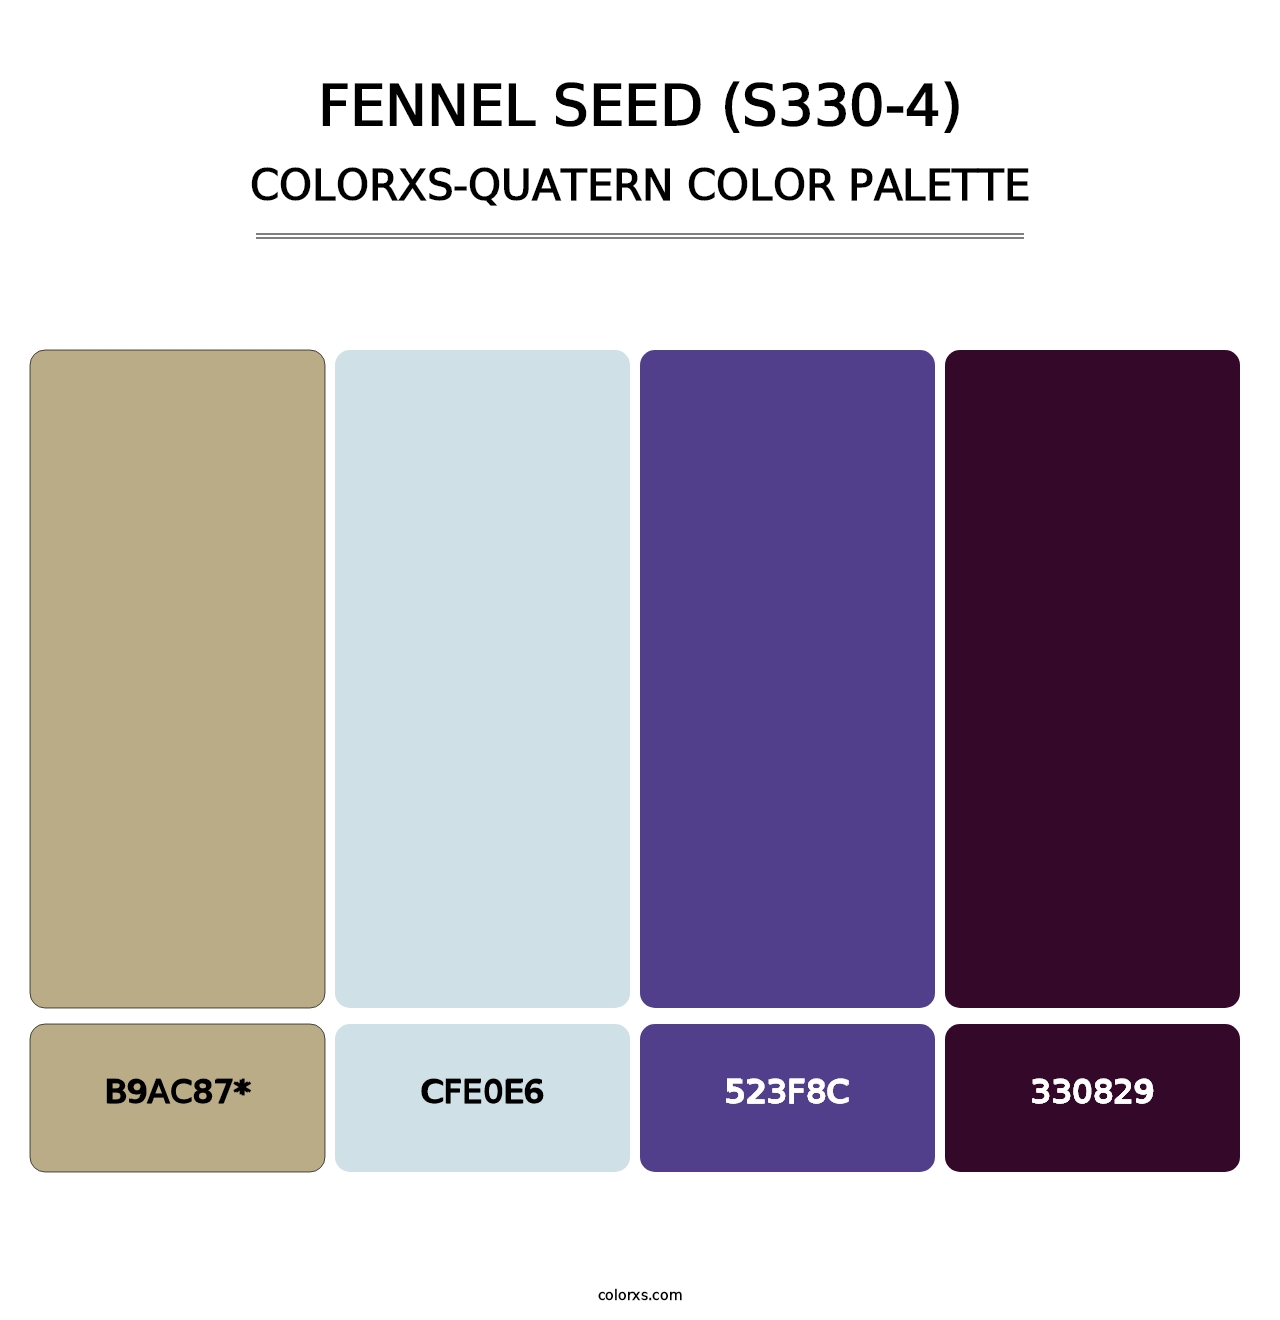 Fennel Seed (S330-4) - Colorxs Quatern Palette